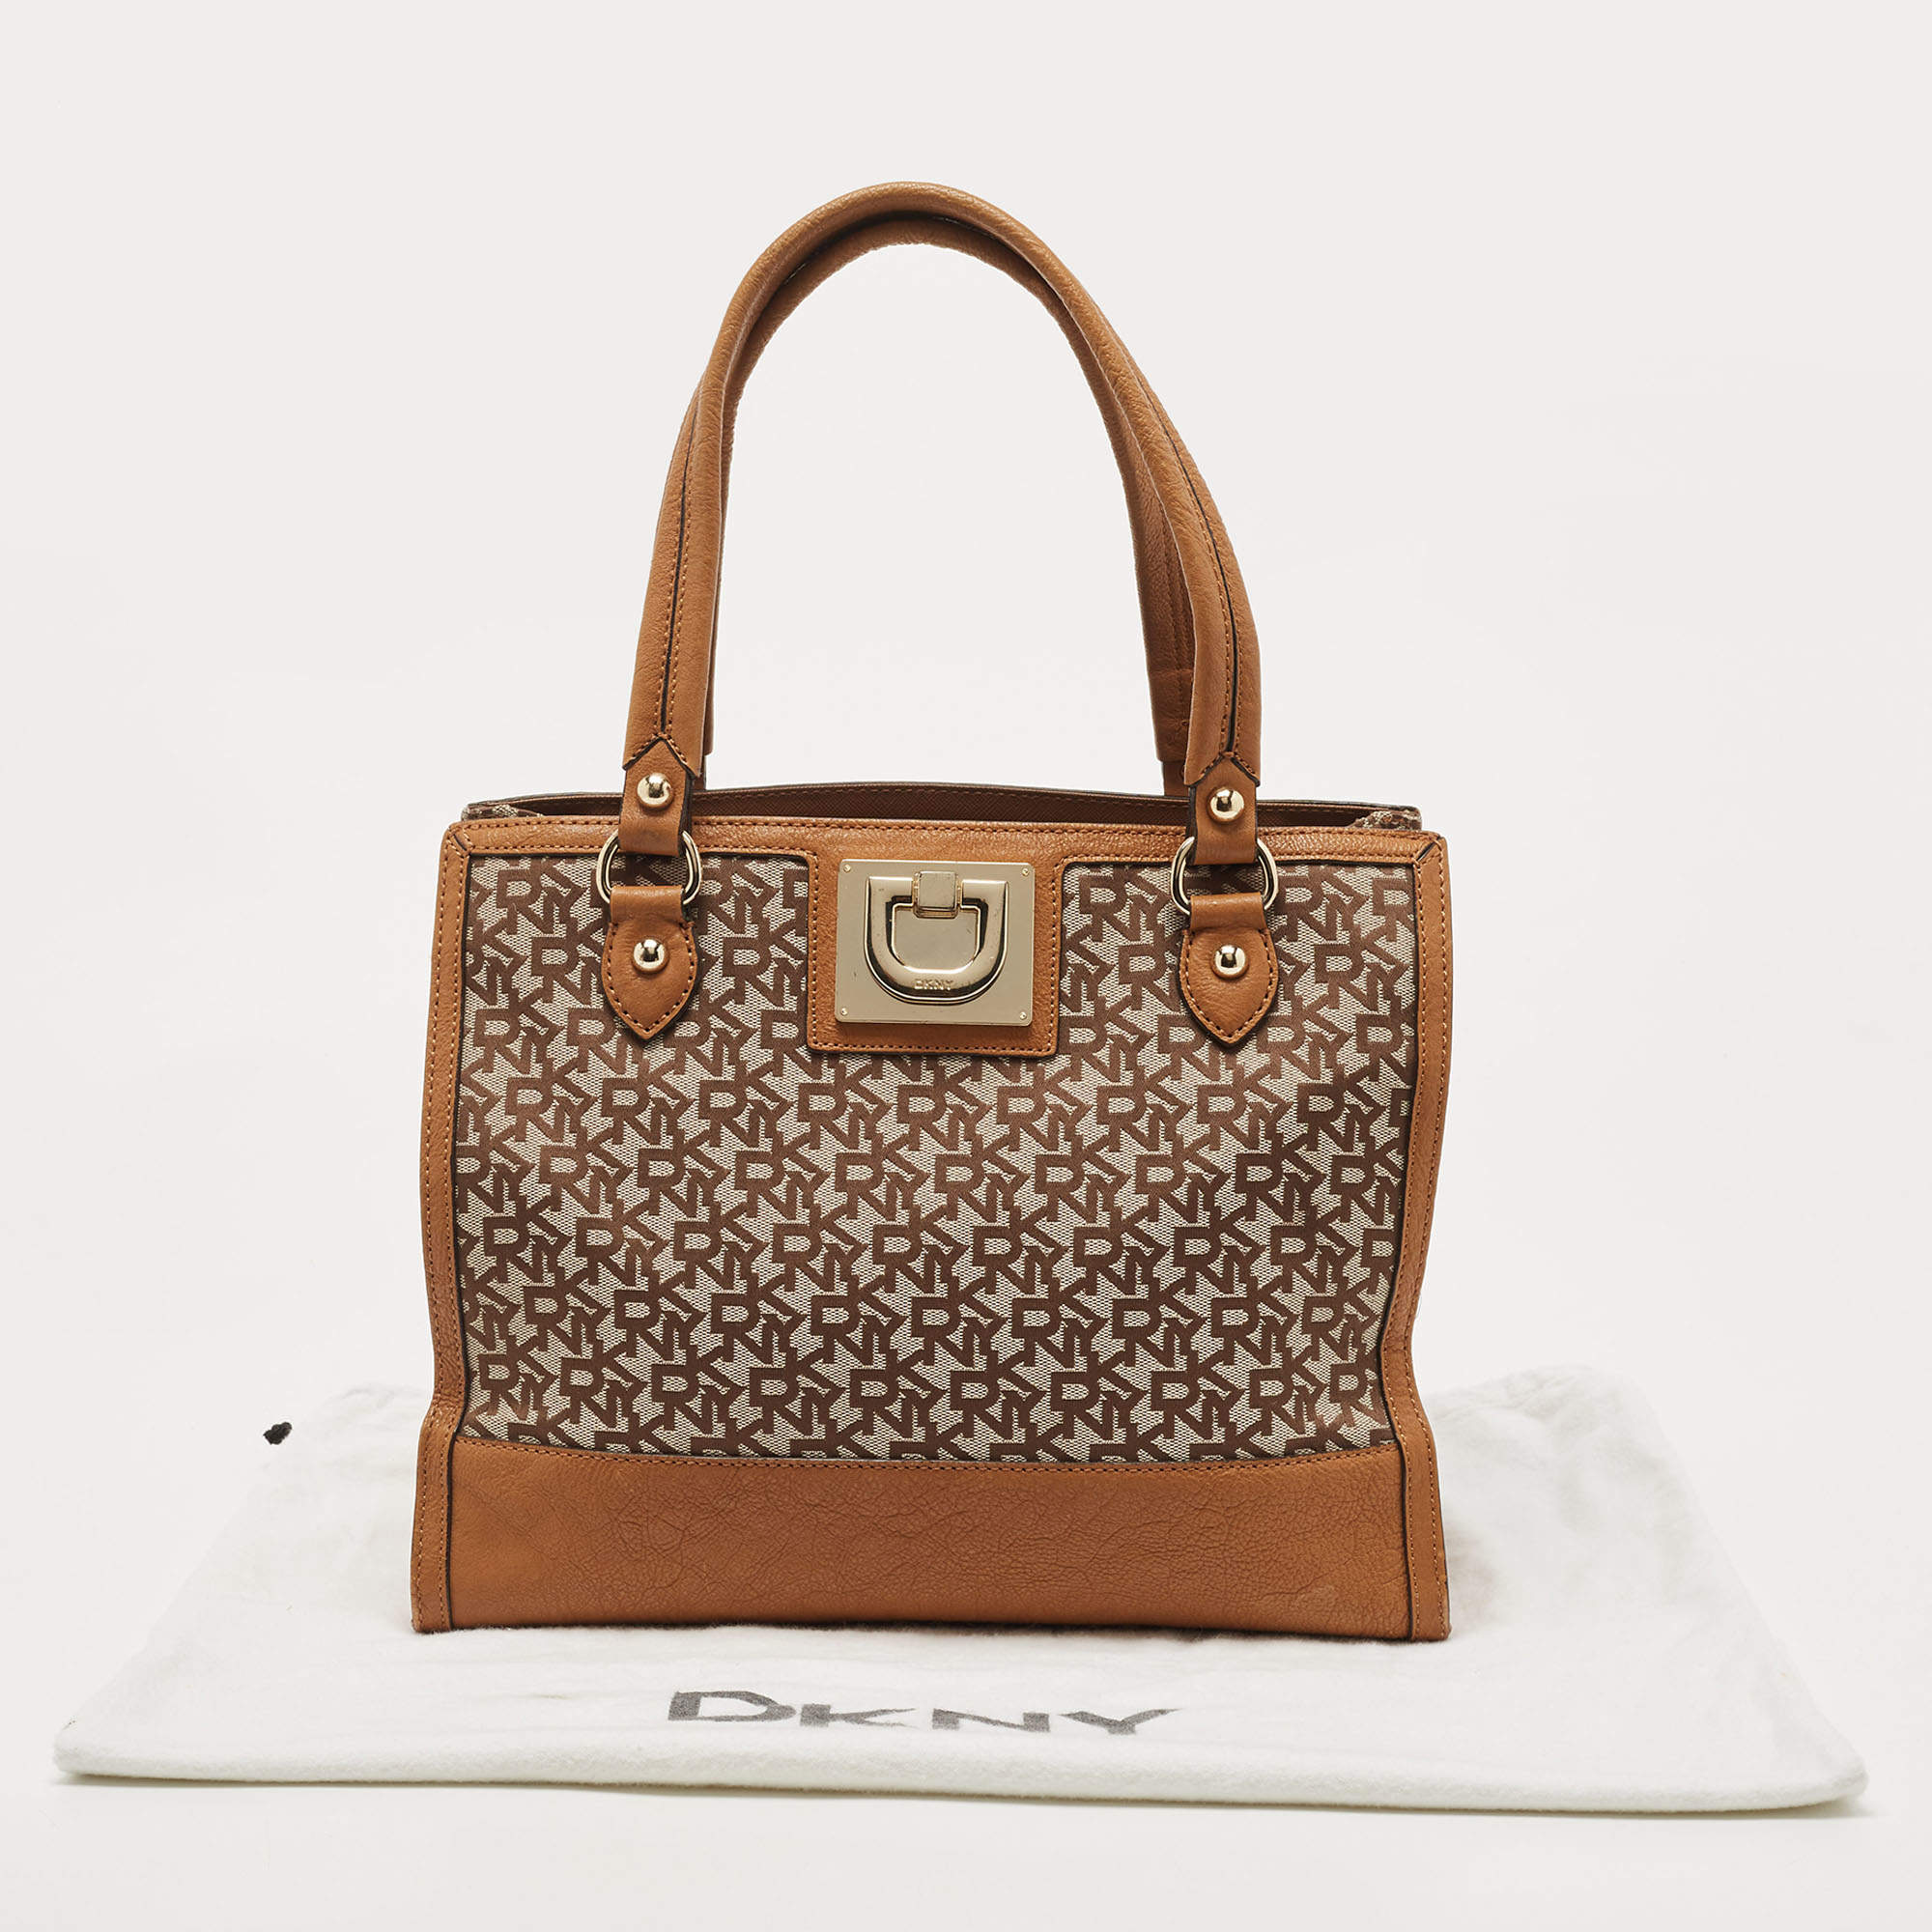 DKNY Brown/Beige Signature Canvas and Leather Tote Dkny